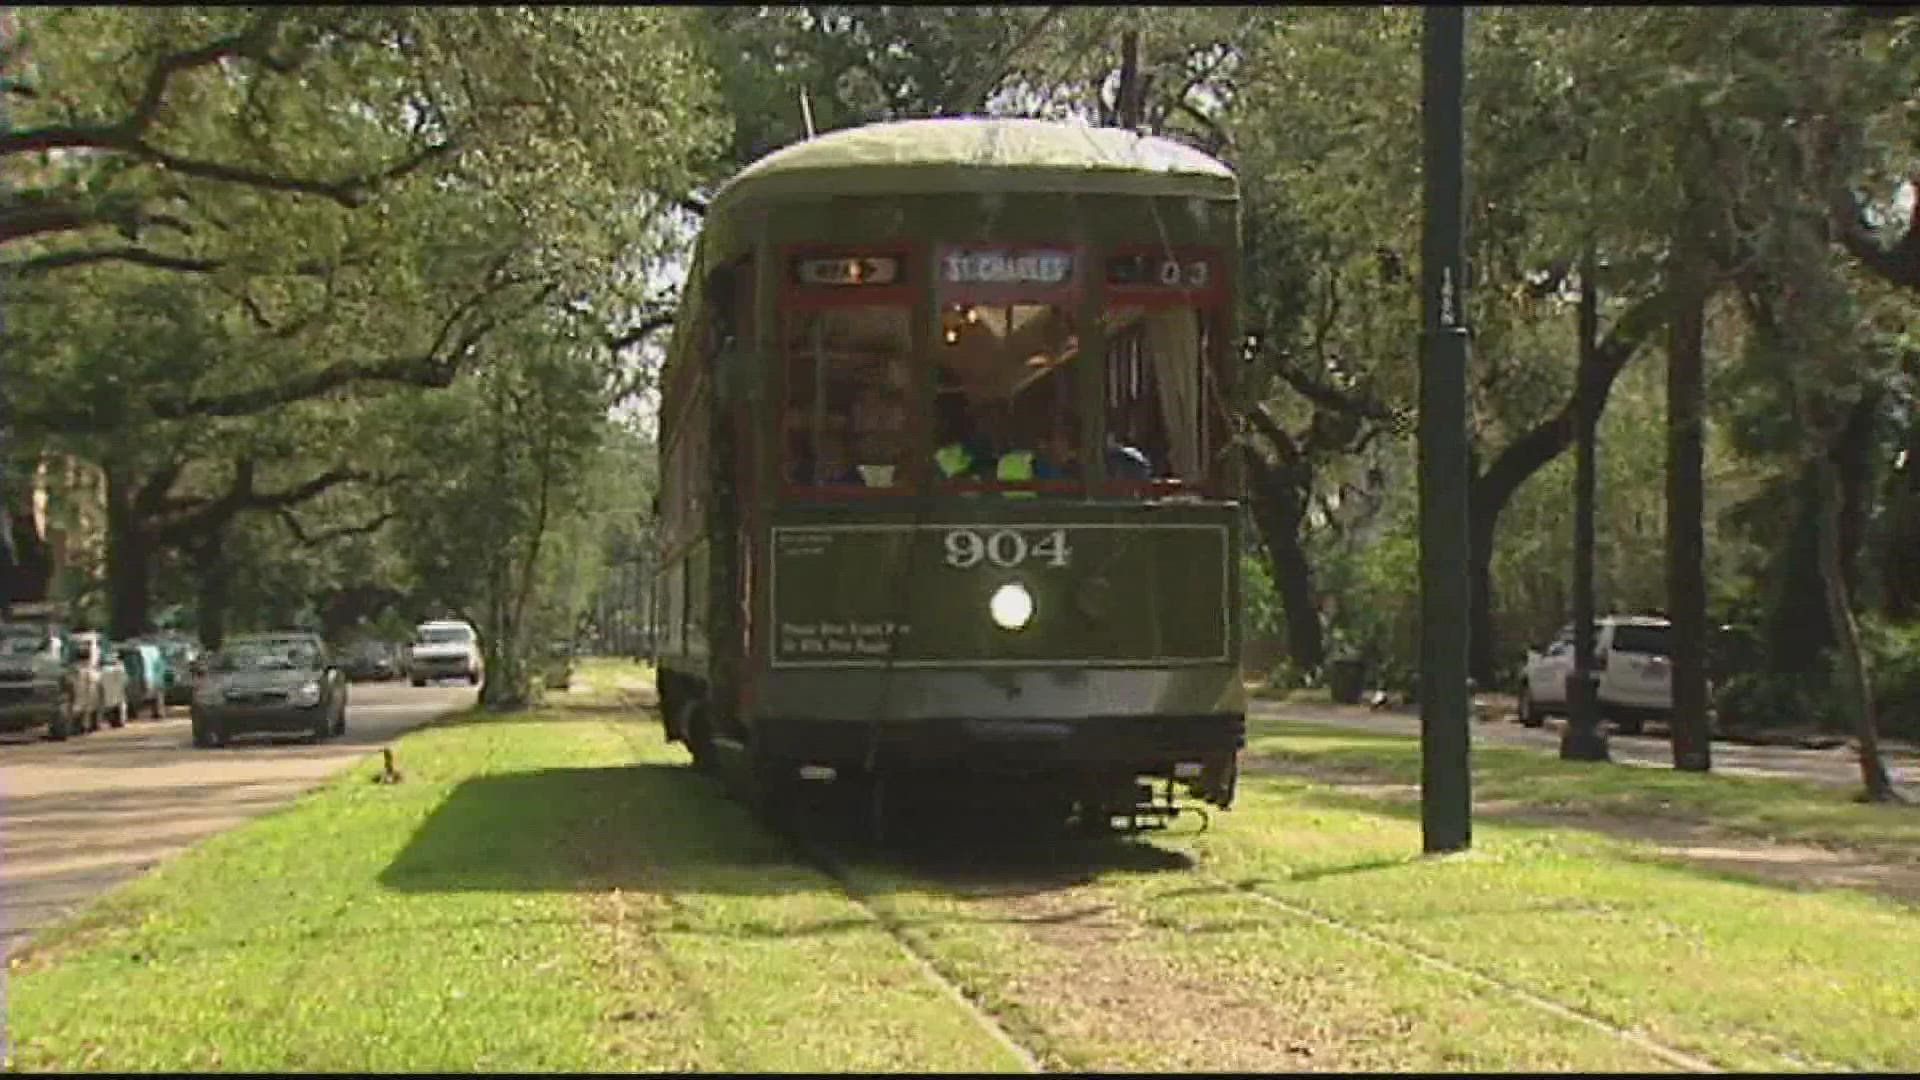 RTA changes to routes for Bayou Classic parade on Saturday